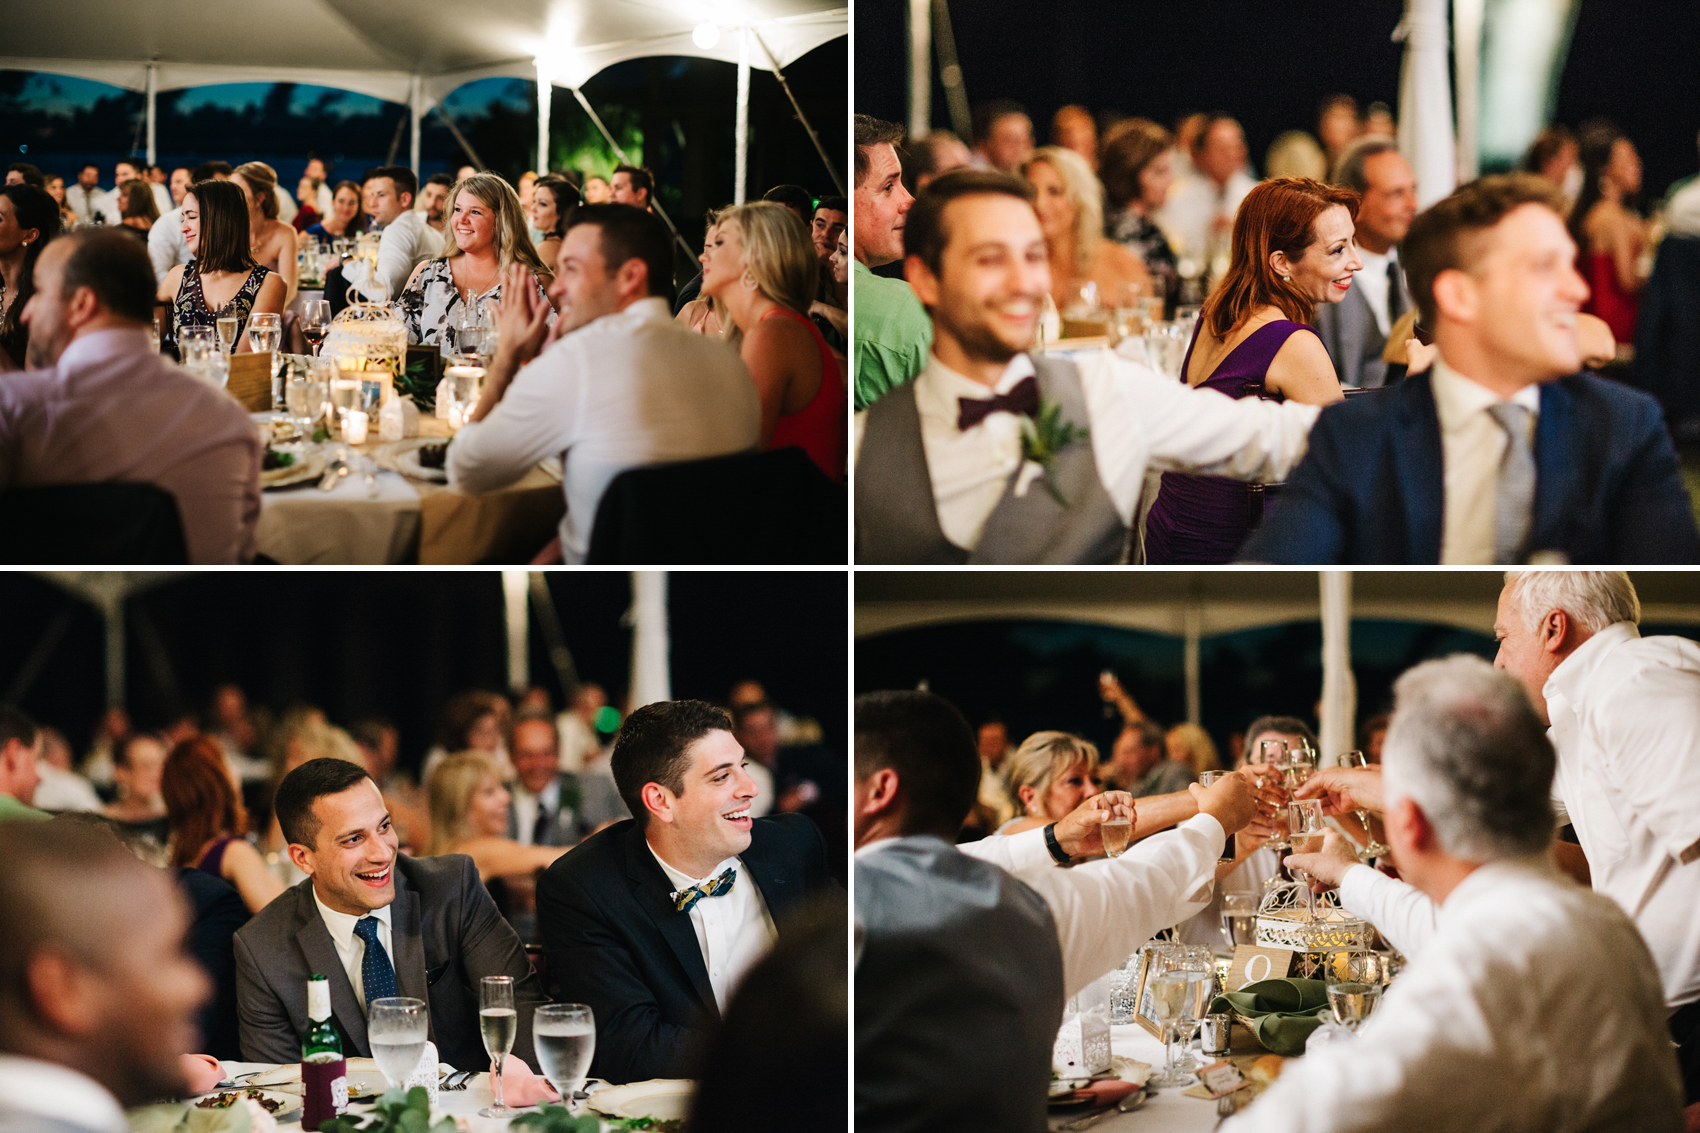 Candid wedding photos of guests laughing and toasting